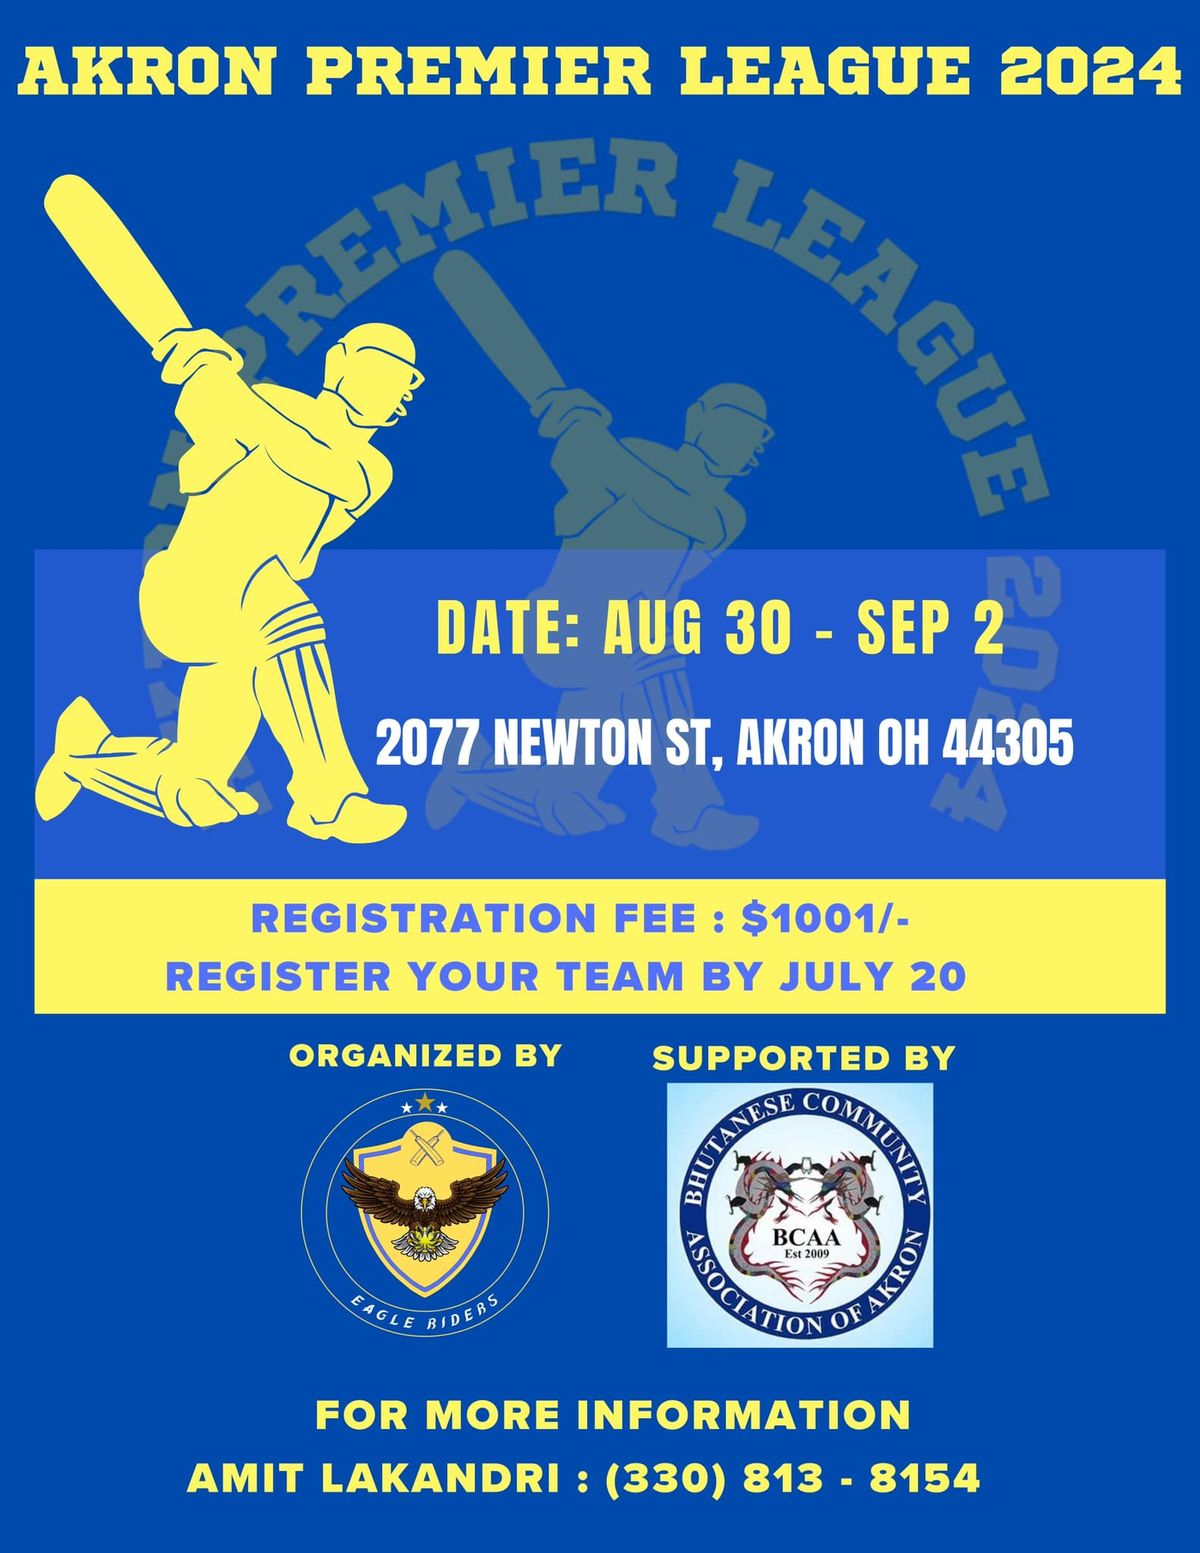 Join Us for an Exciting Cricket Tournament!